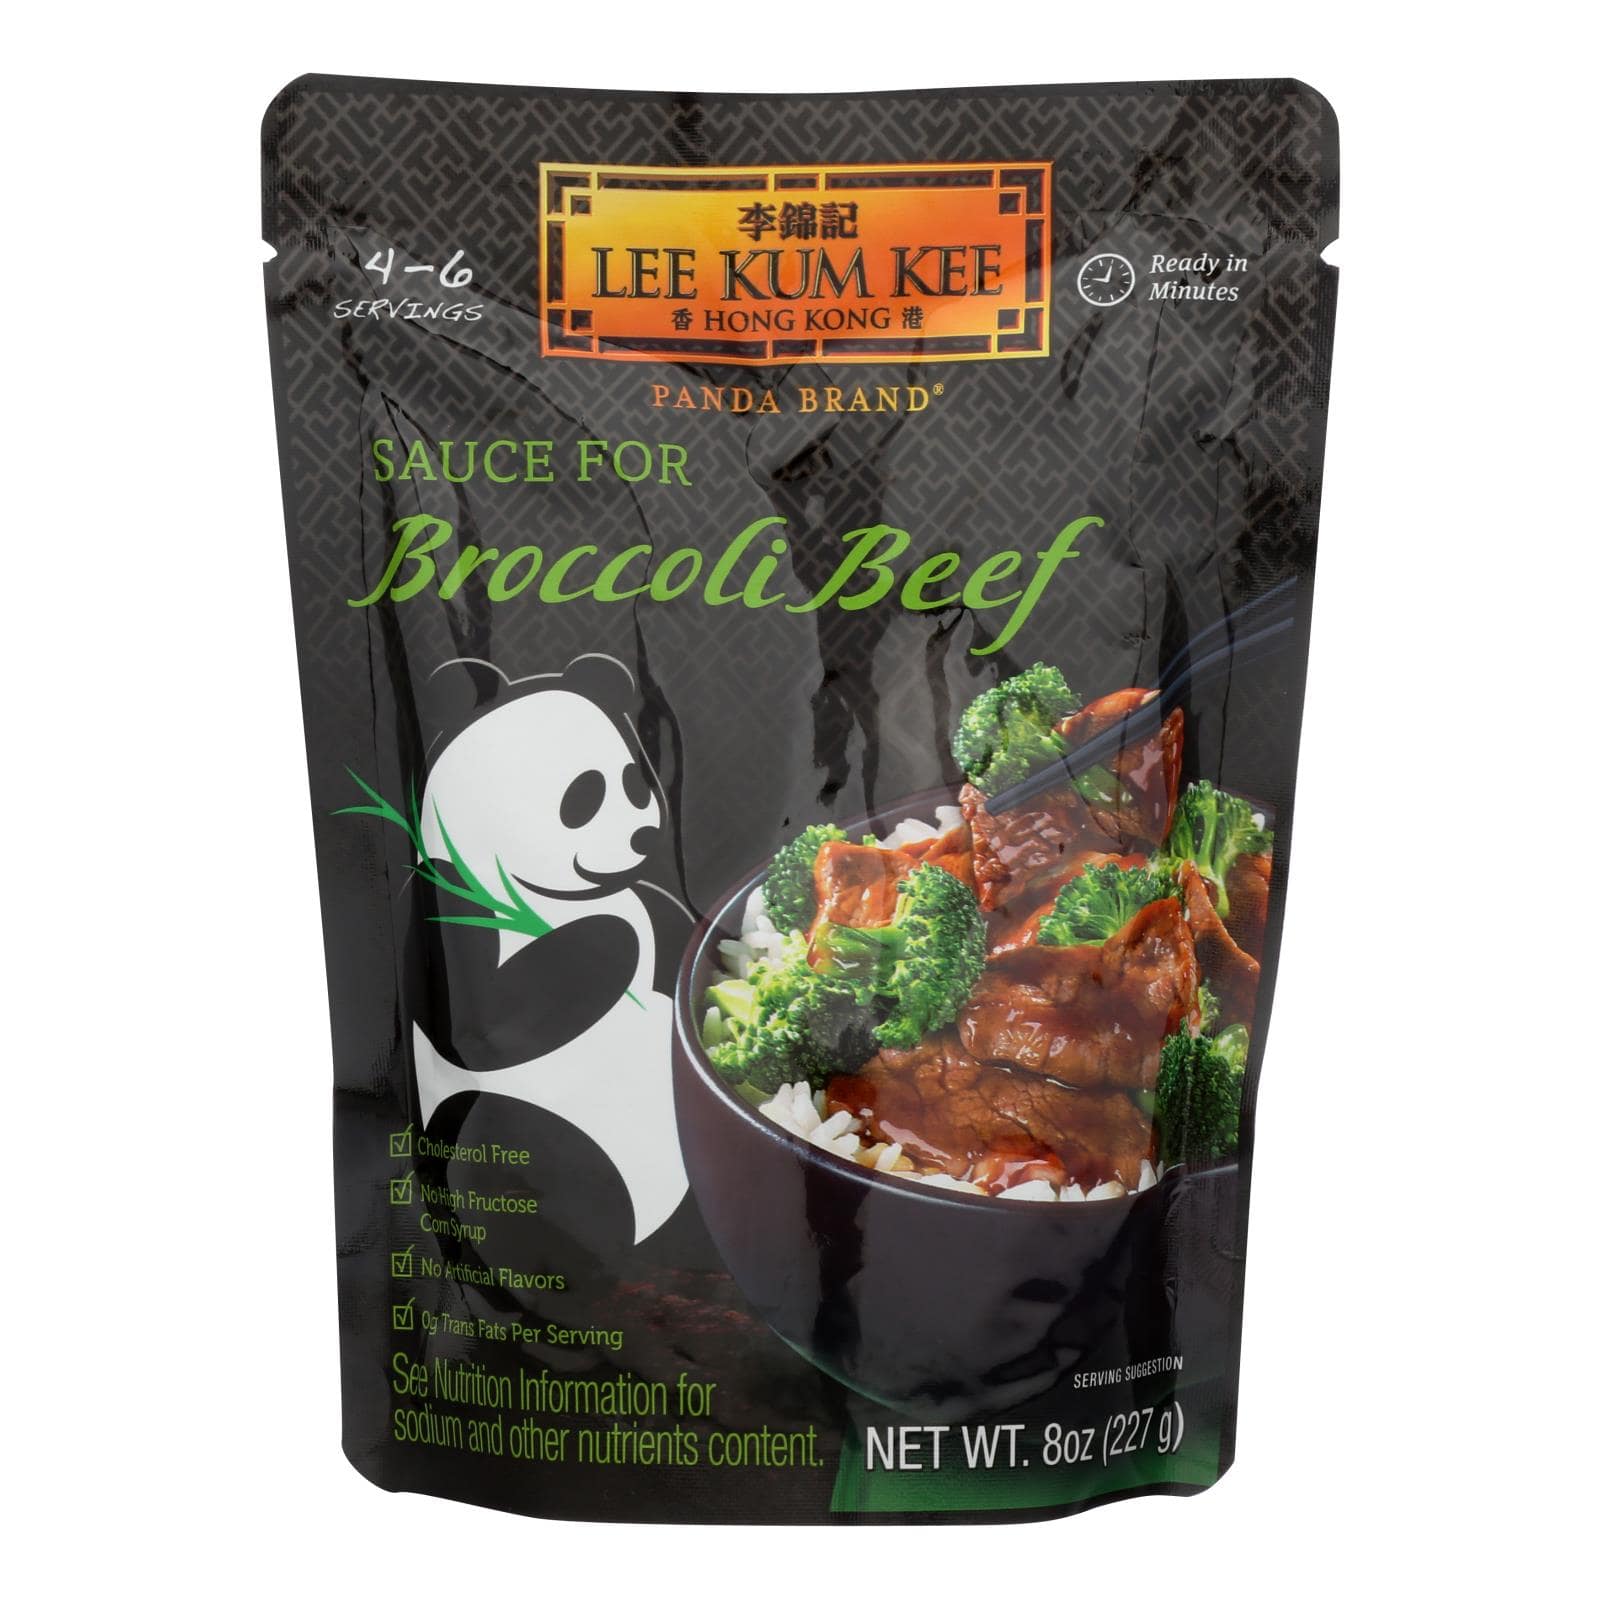 Buy Lee Kum Kee Sauce - Ready To Serve - Broccoli Beef - 8 Oz - Case Of 6  at OnlyNaturals.us